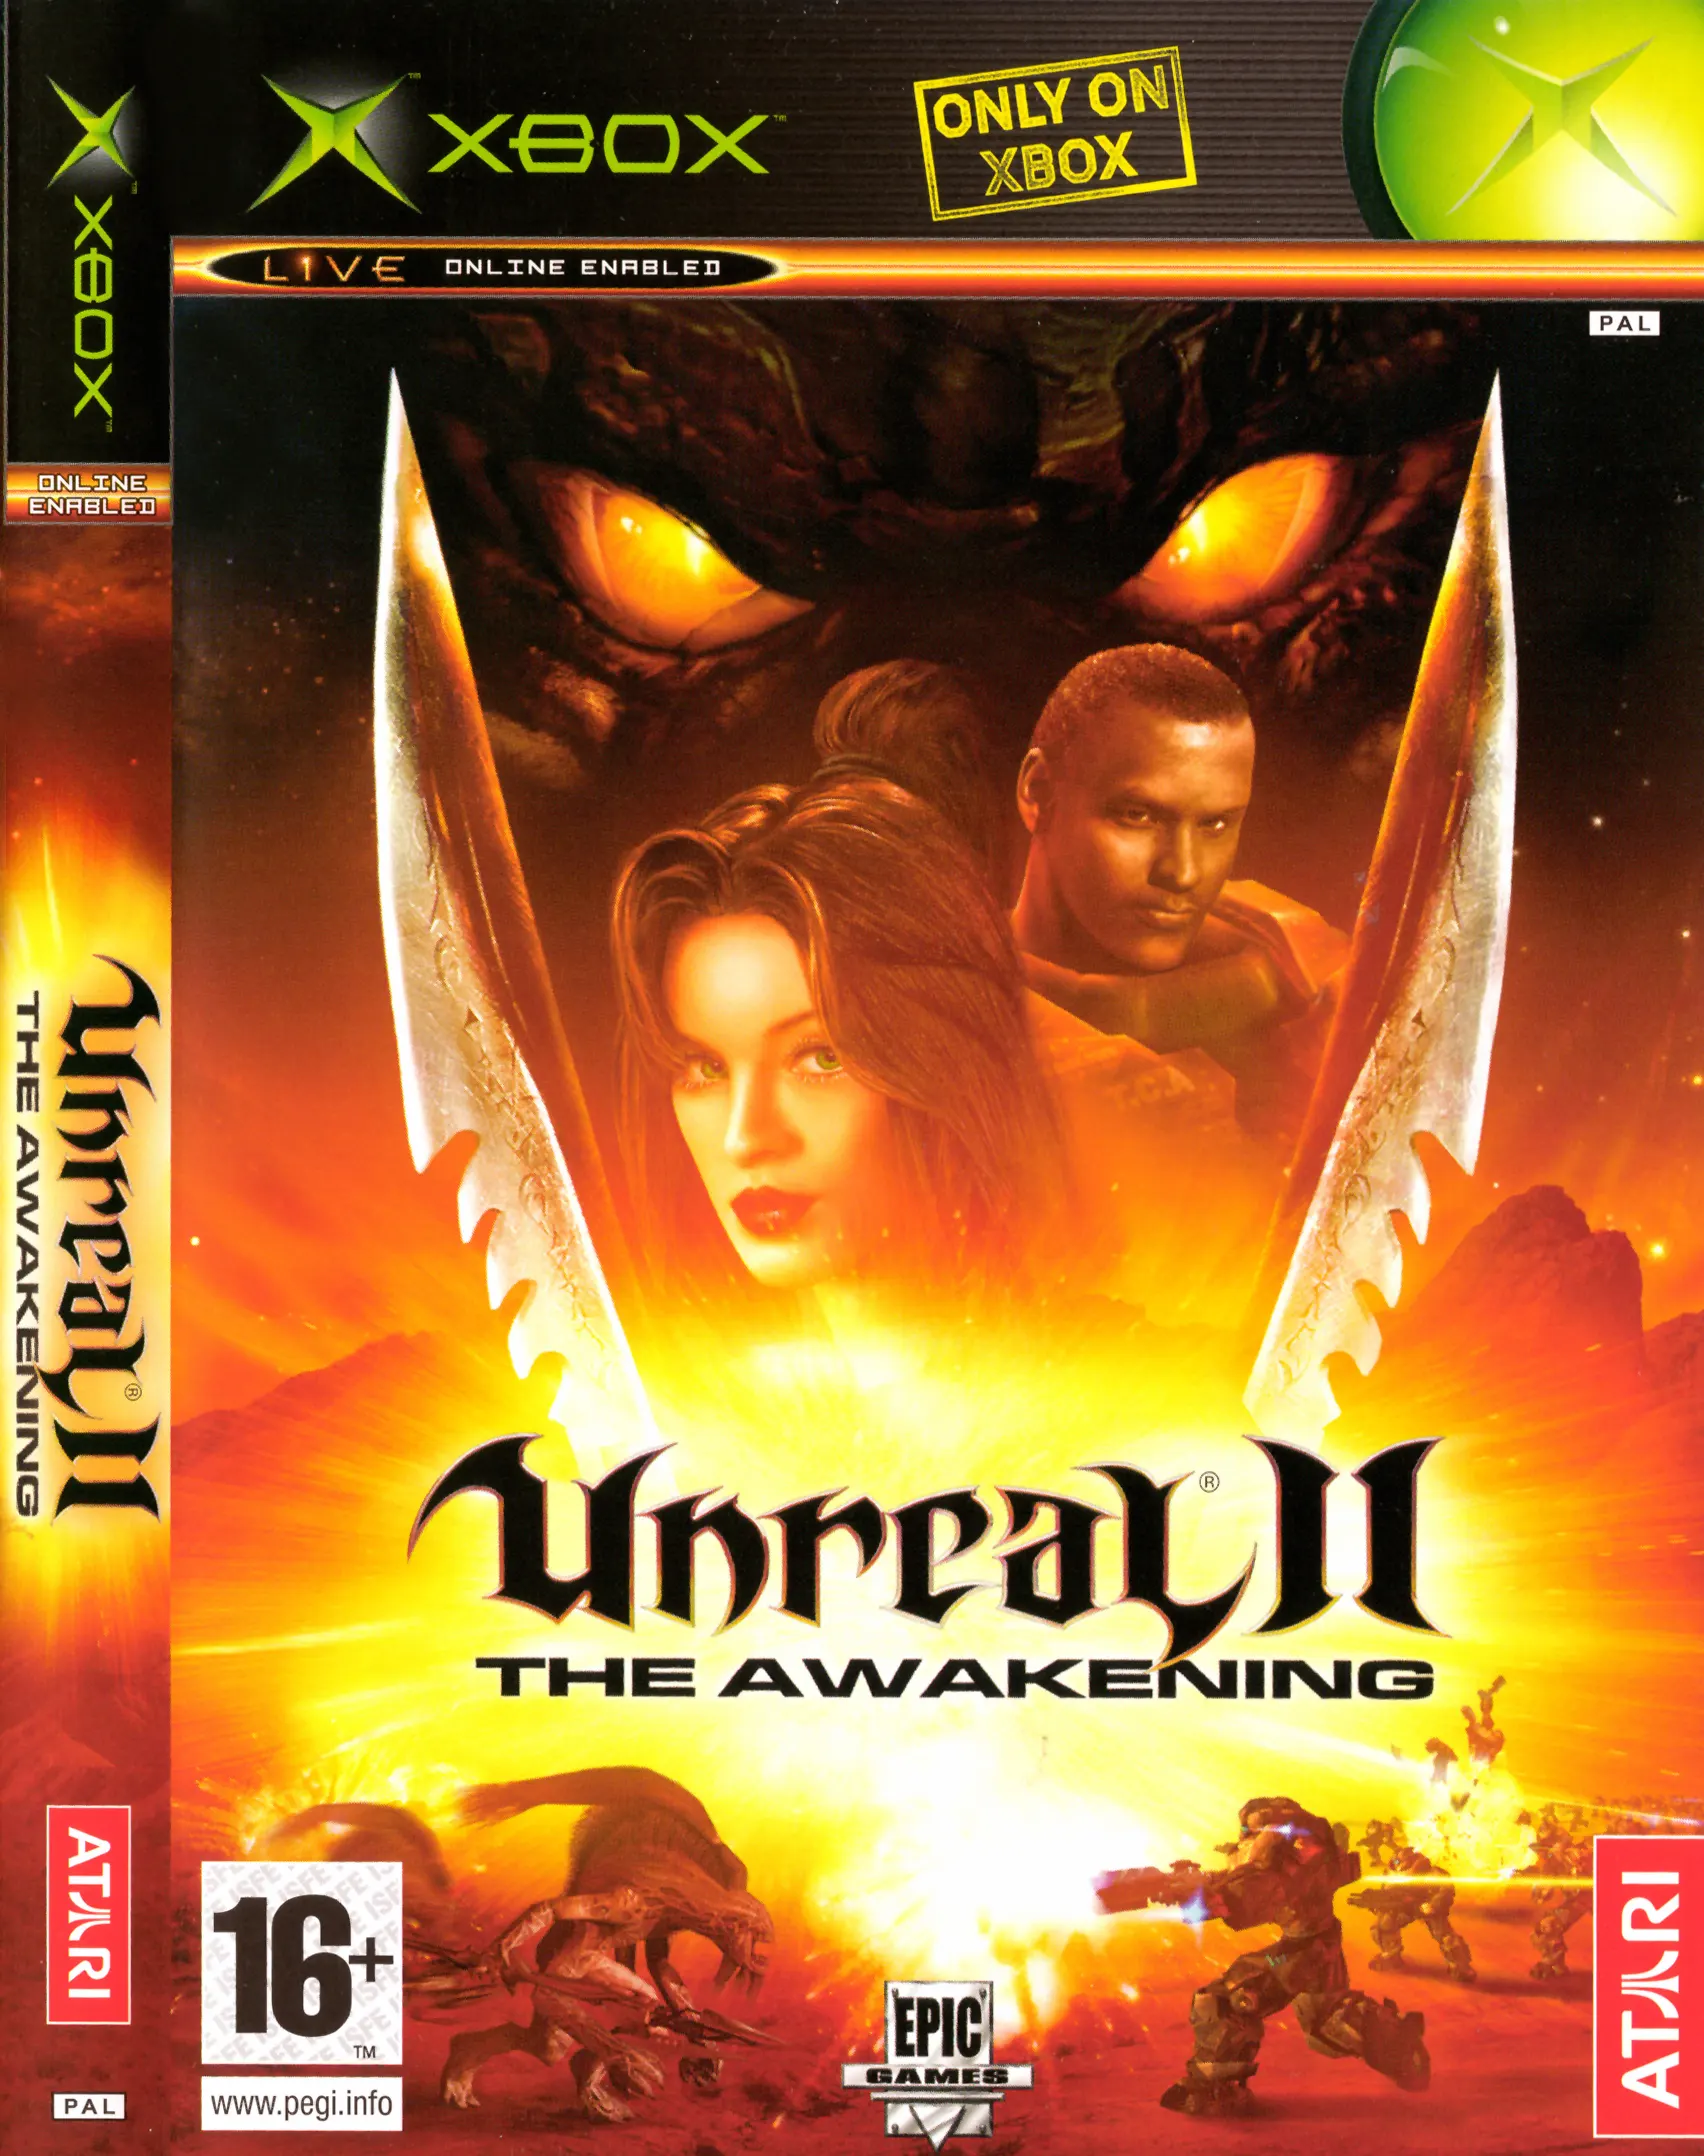 Original Xbox Game Console Unreal II: The Awakening game box front.